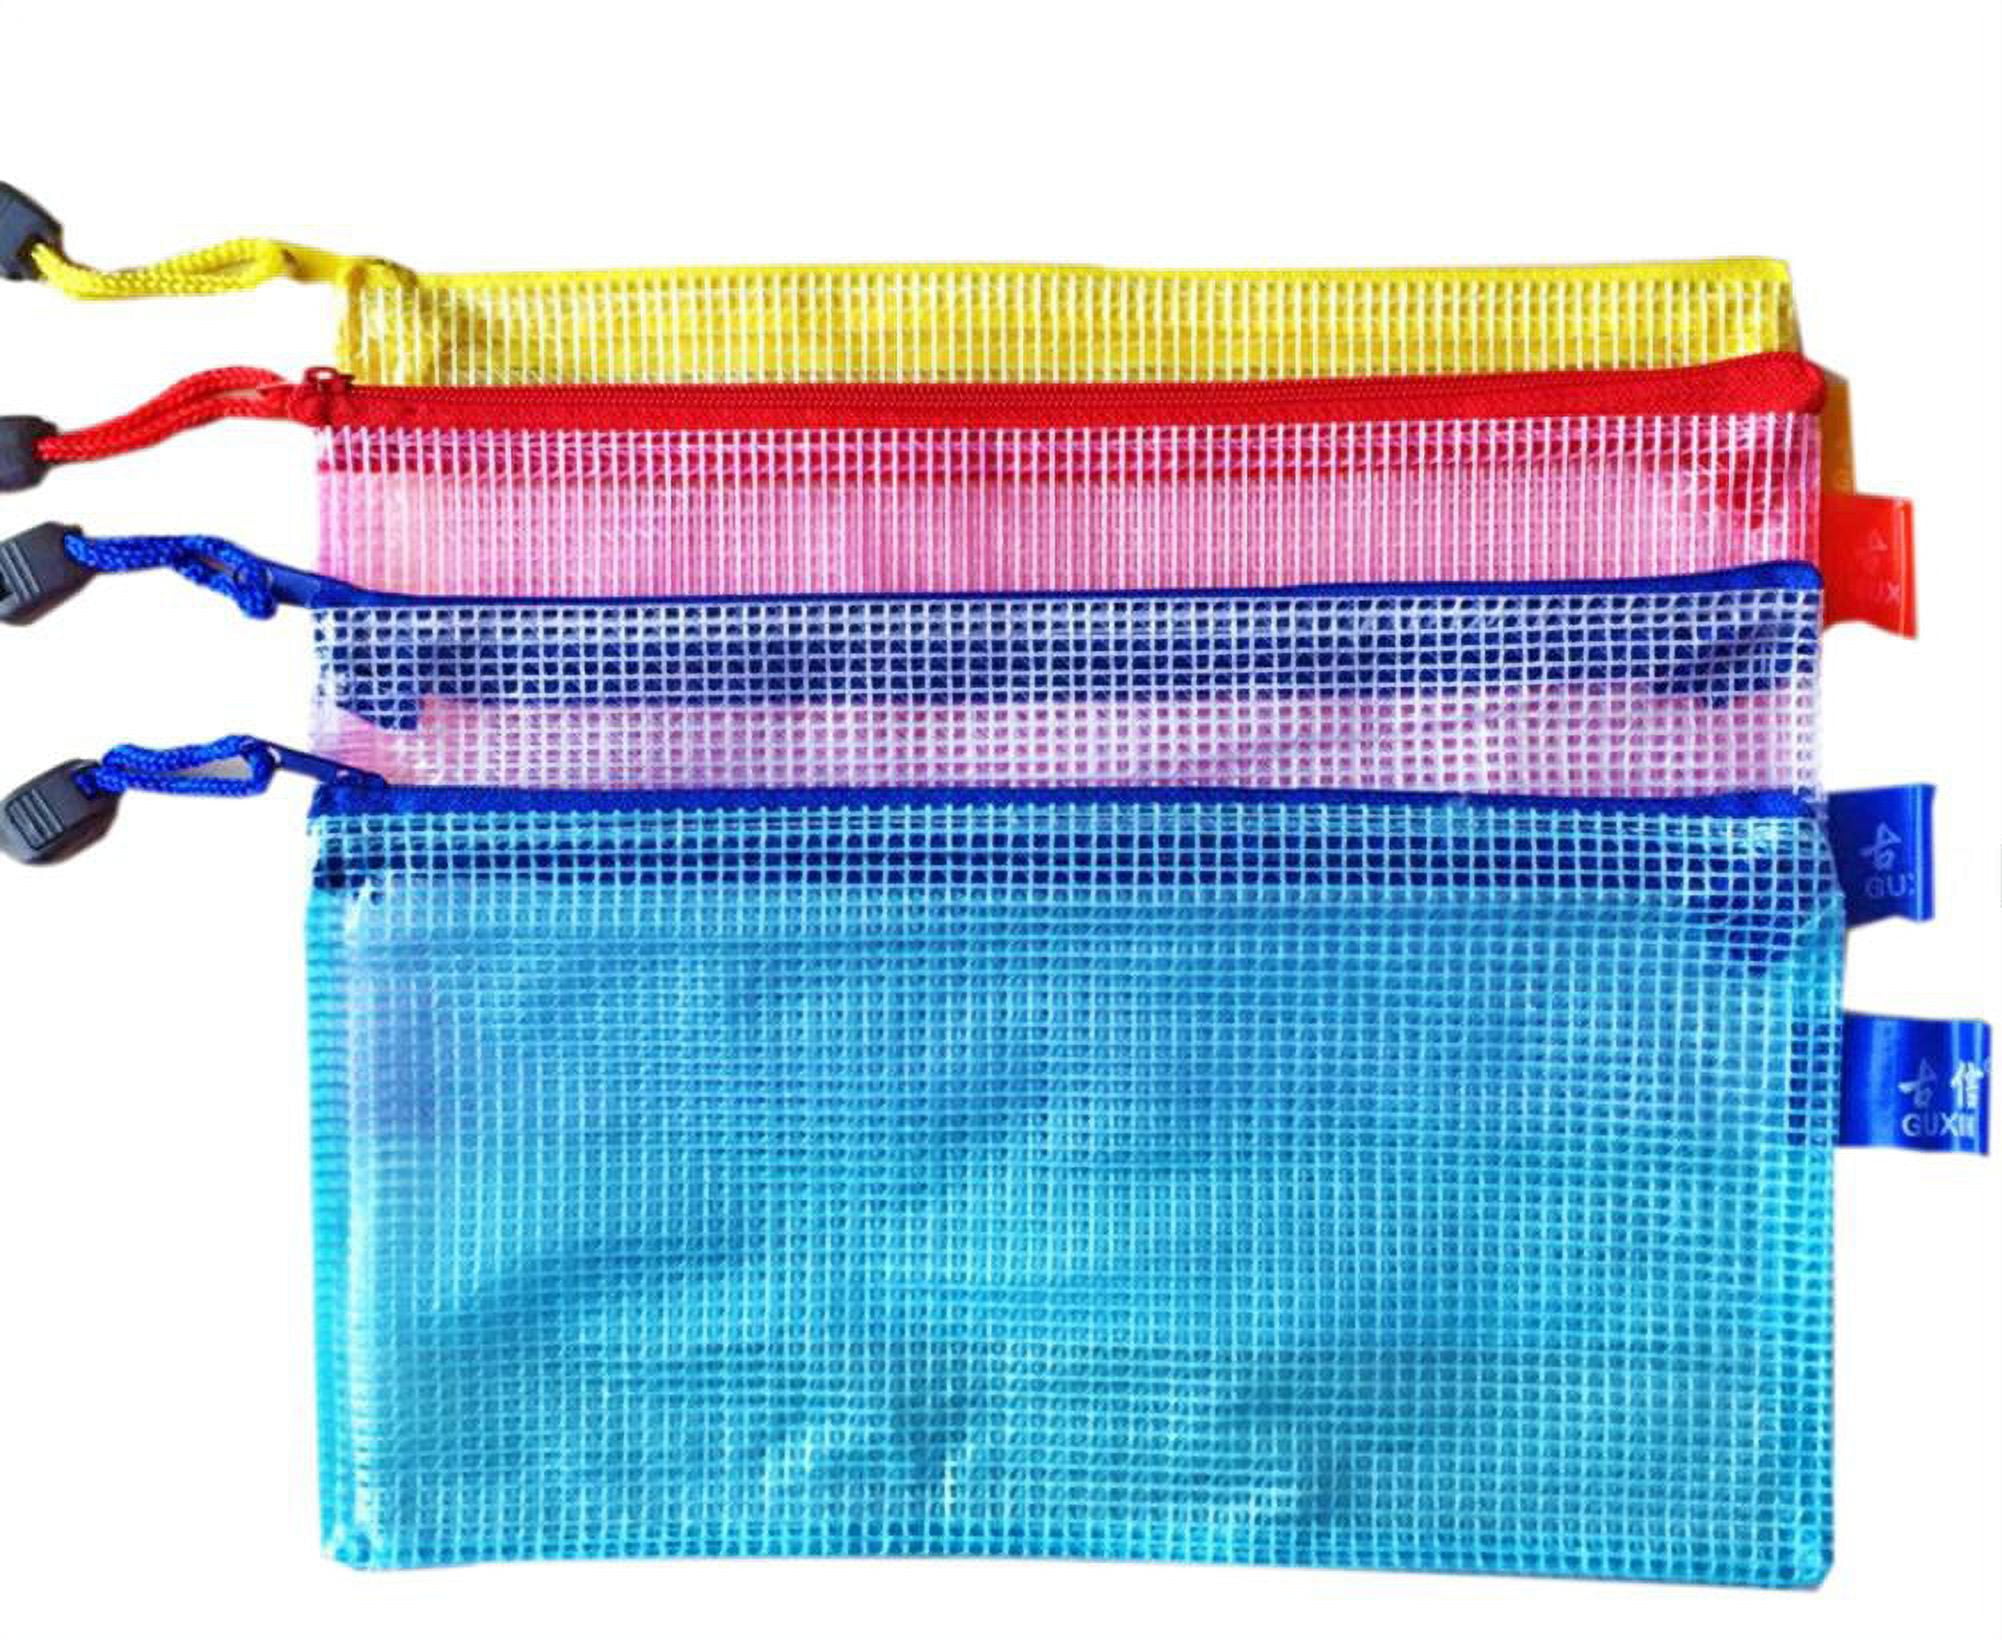 EOOUT 24pcs Mesh Zipper Pouch, Board Game Organizer, Storage Bags, Plastic  Puzzle Bag for Organizing, Letter Size, A4 Size, for School Students Office  Supplies price in Saudi Arabia